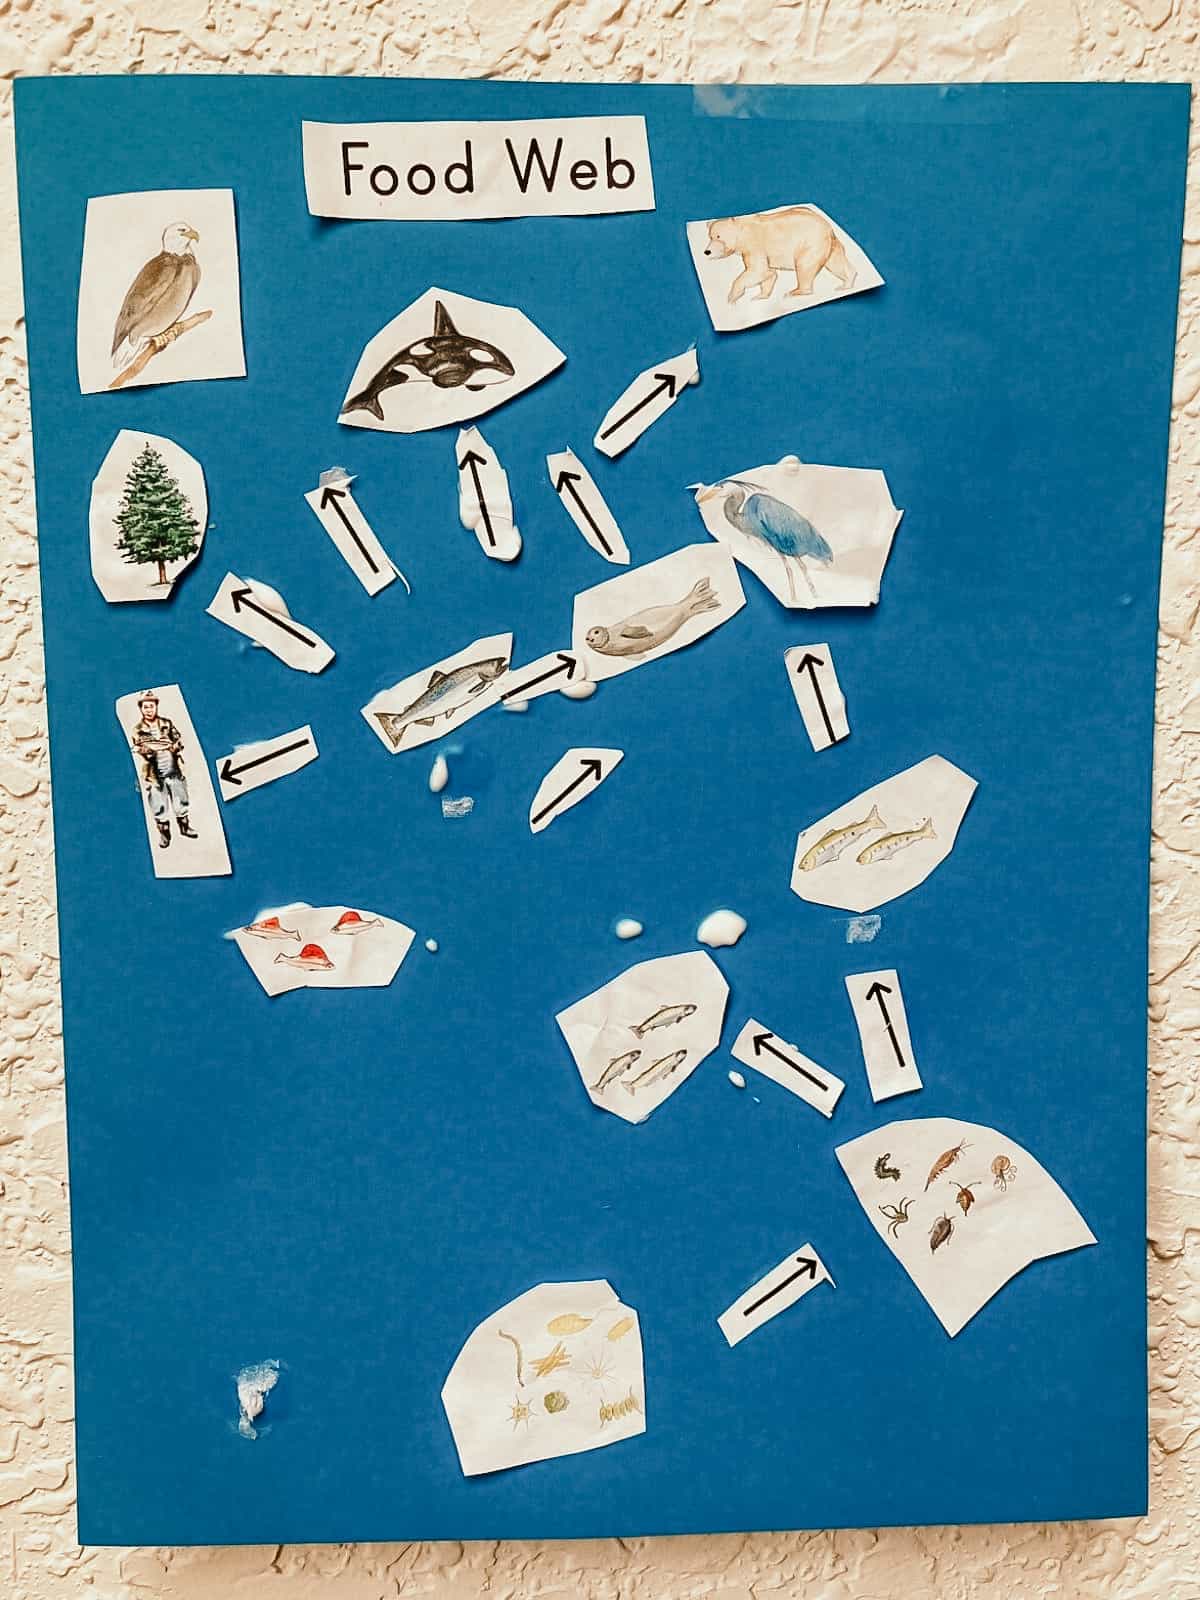 Food web for salmon including illustrations of people and animals on blue paper